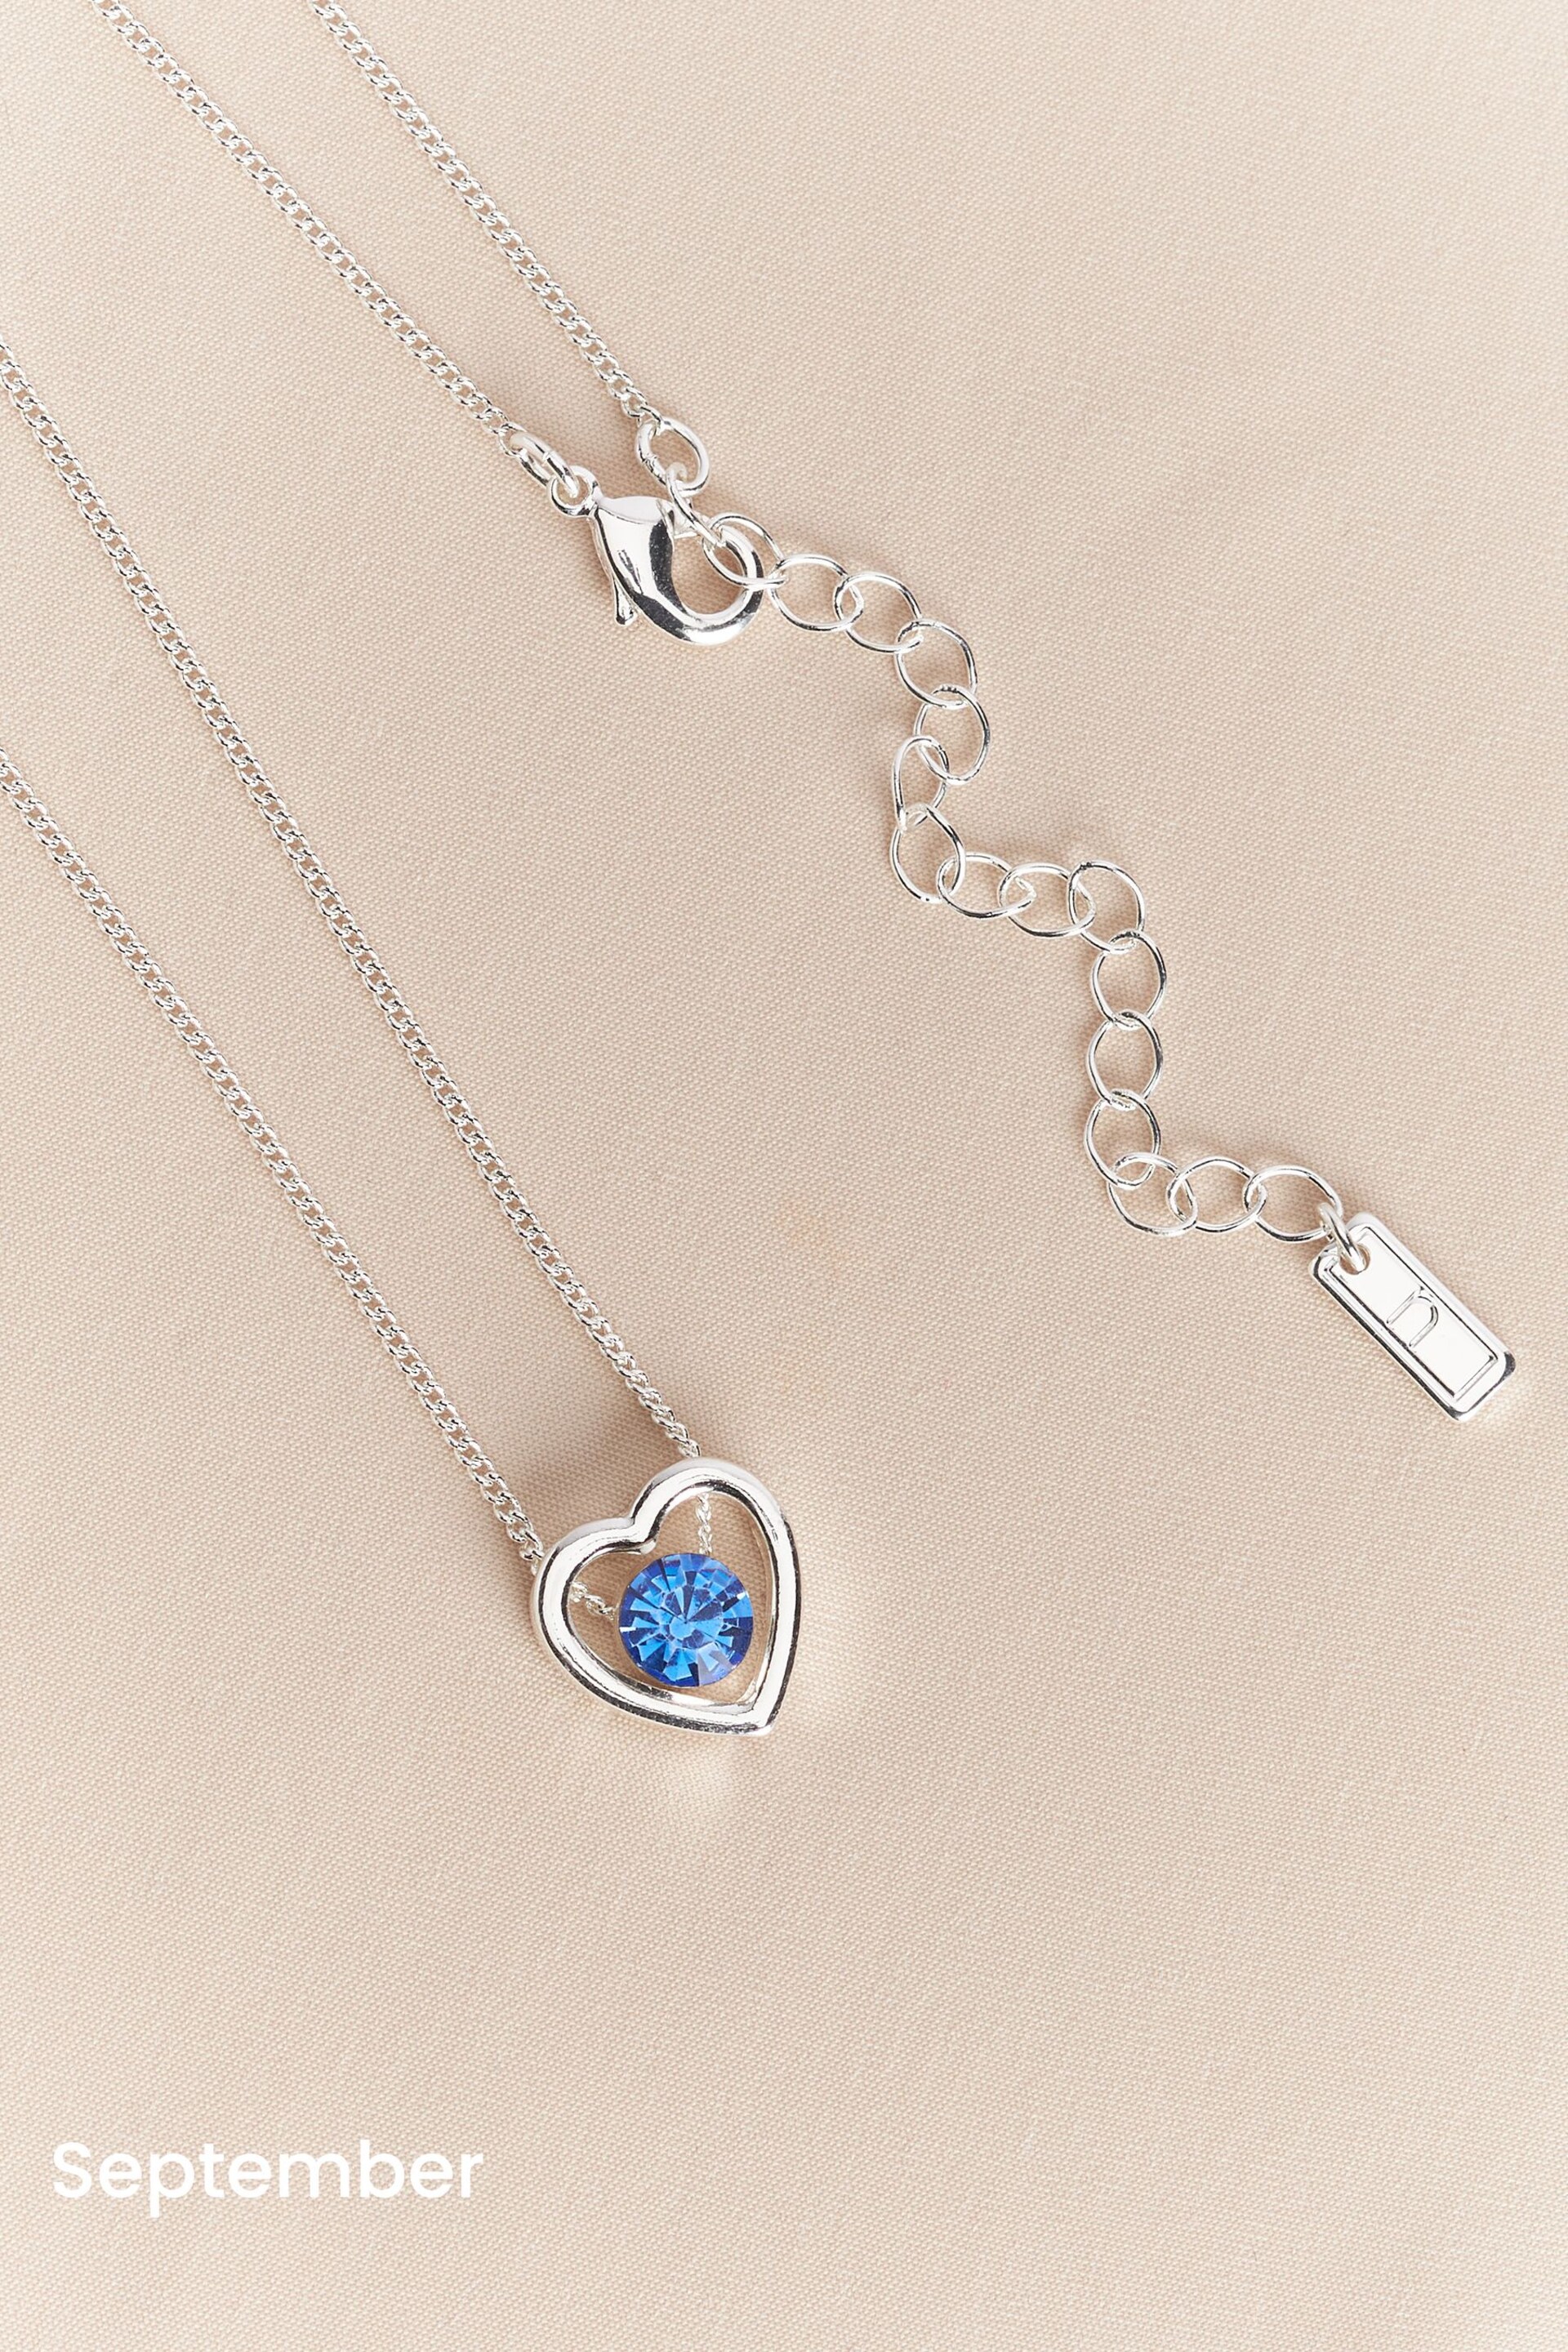 Silver Plated Heart Birthstone Necklace - Image 10 of 13